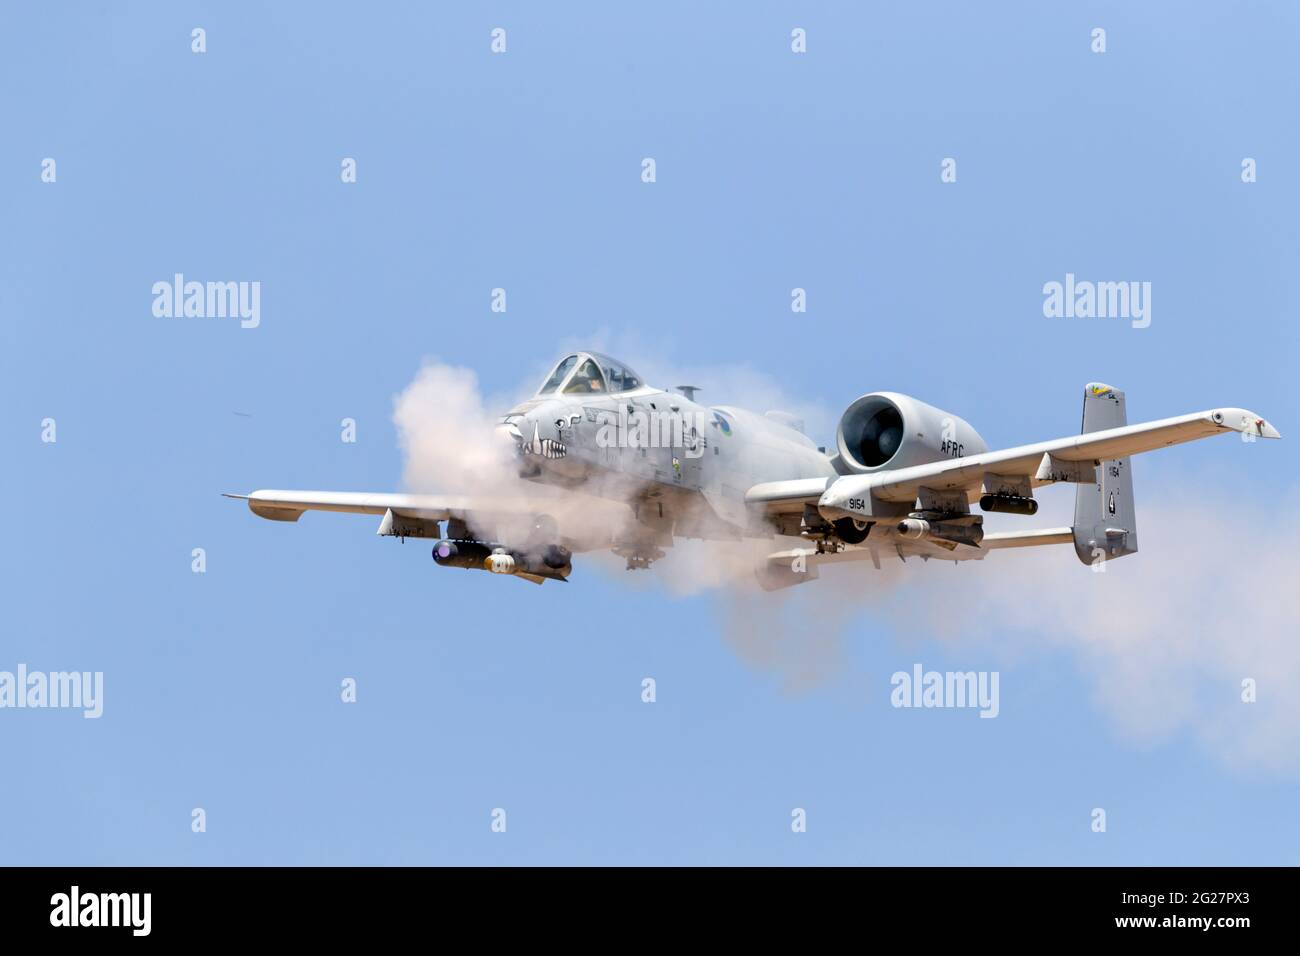 A U.S. Air Force A-10 Thunderbolt II fires its 30mm cannon. Stock Photo